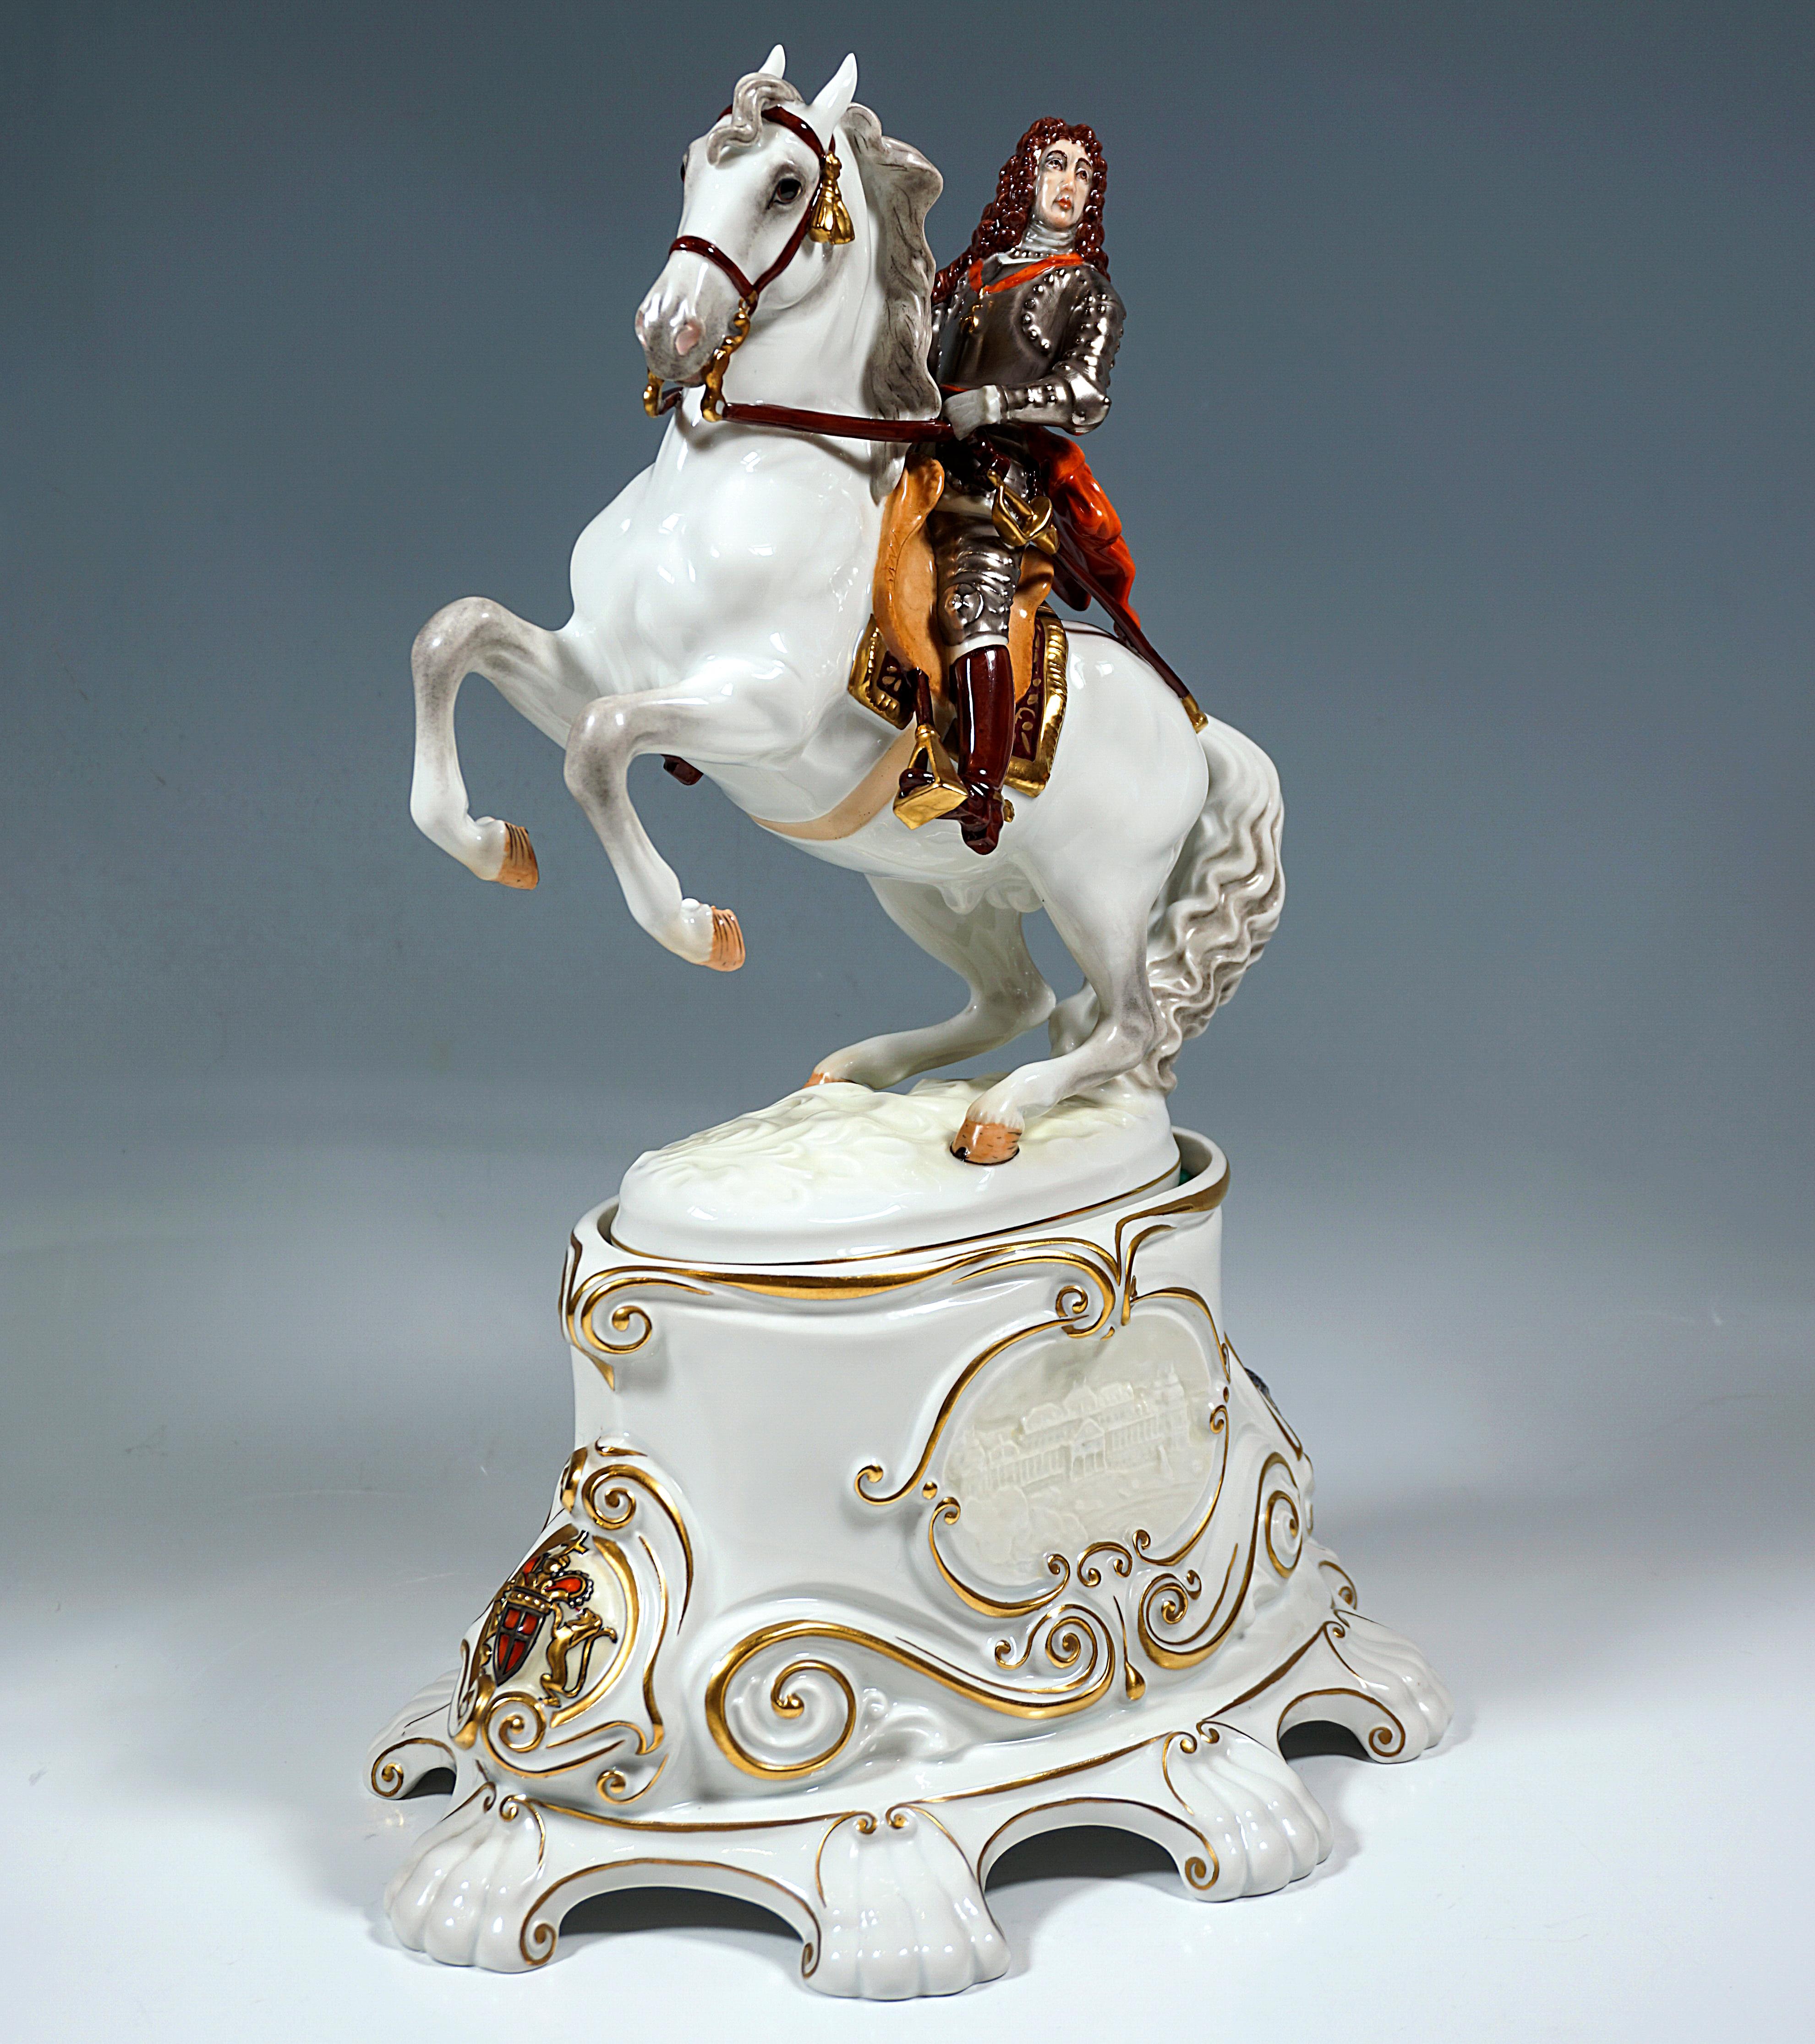 Depiction of the commander Prince Eugene of Savoy with a baroque curly wig and in armor on horseback, holding the field marshal's baton in his right hand, the horse performing the classic riding figure of the 'Levade' and based on an oval plinth, as